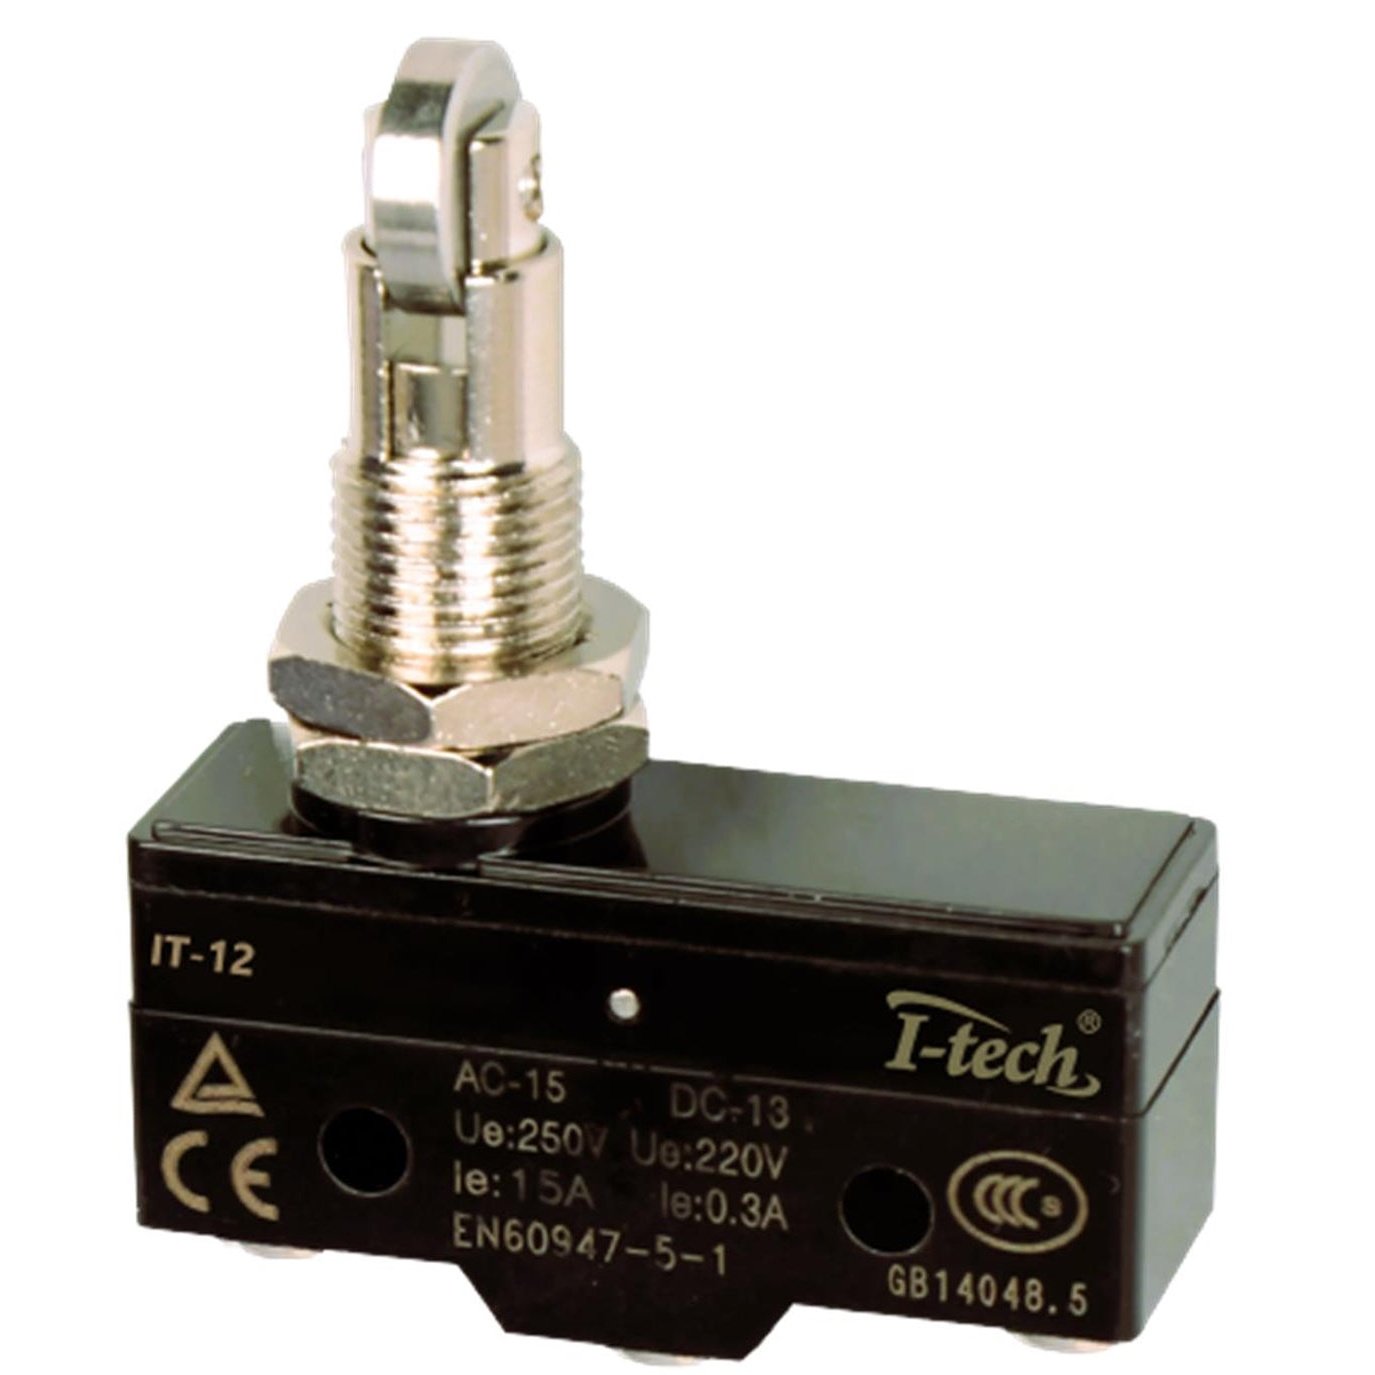 i-tech Micro Switch IT-12(replacement for z15gq21b & cm1309)